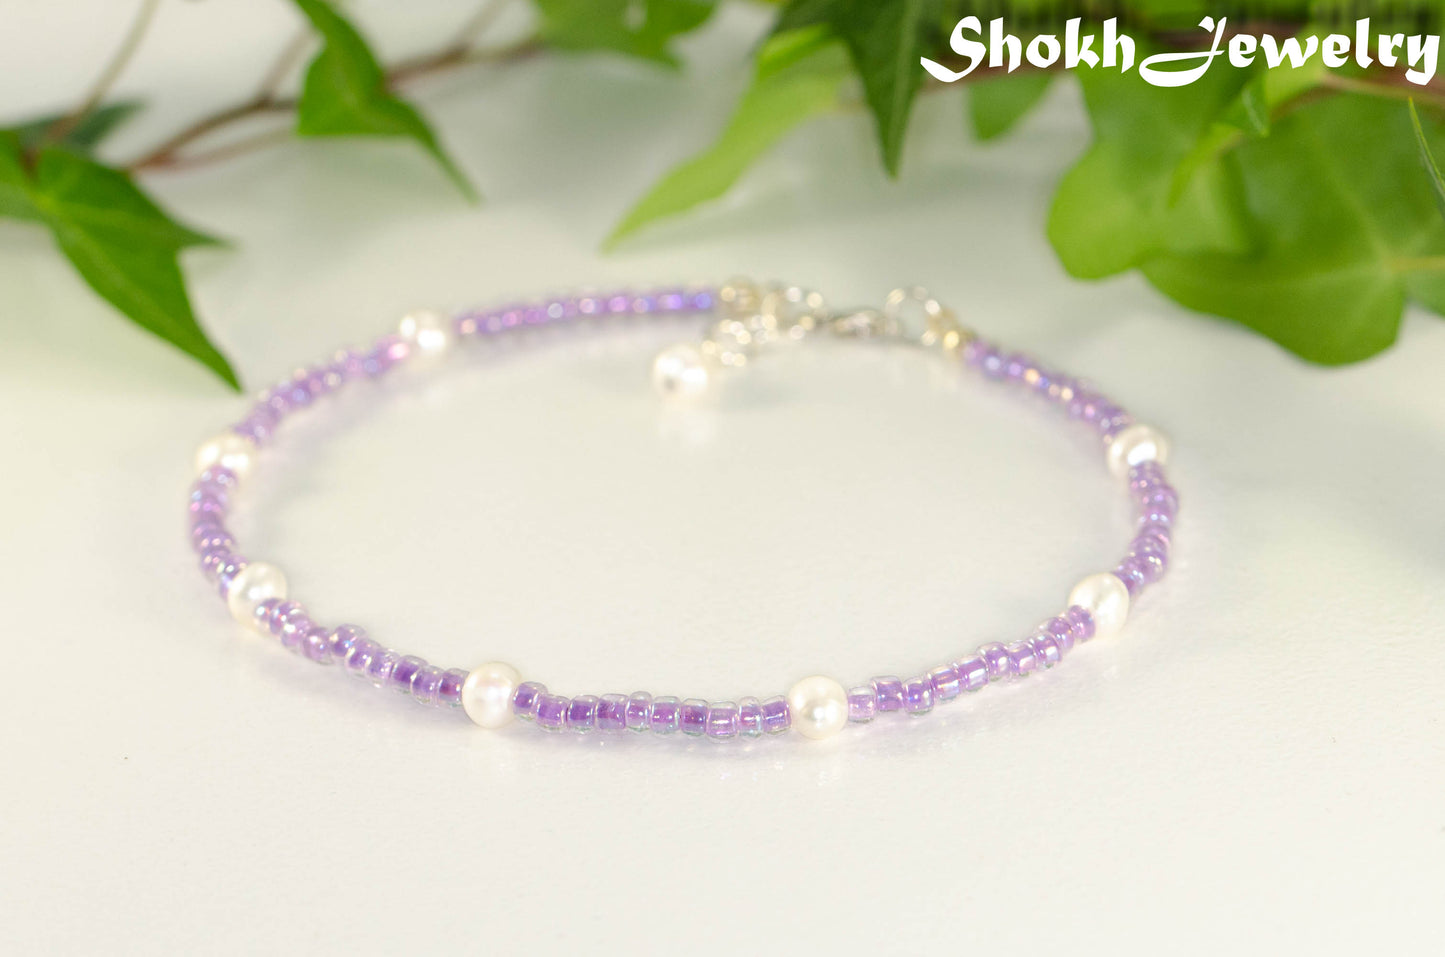 Freshwater Pearl and Purple Seed Bead Anklet.